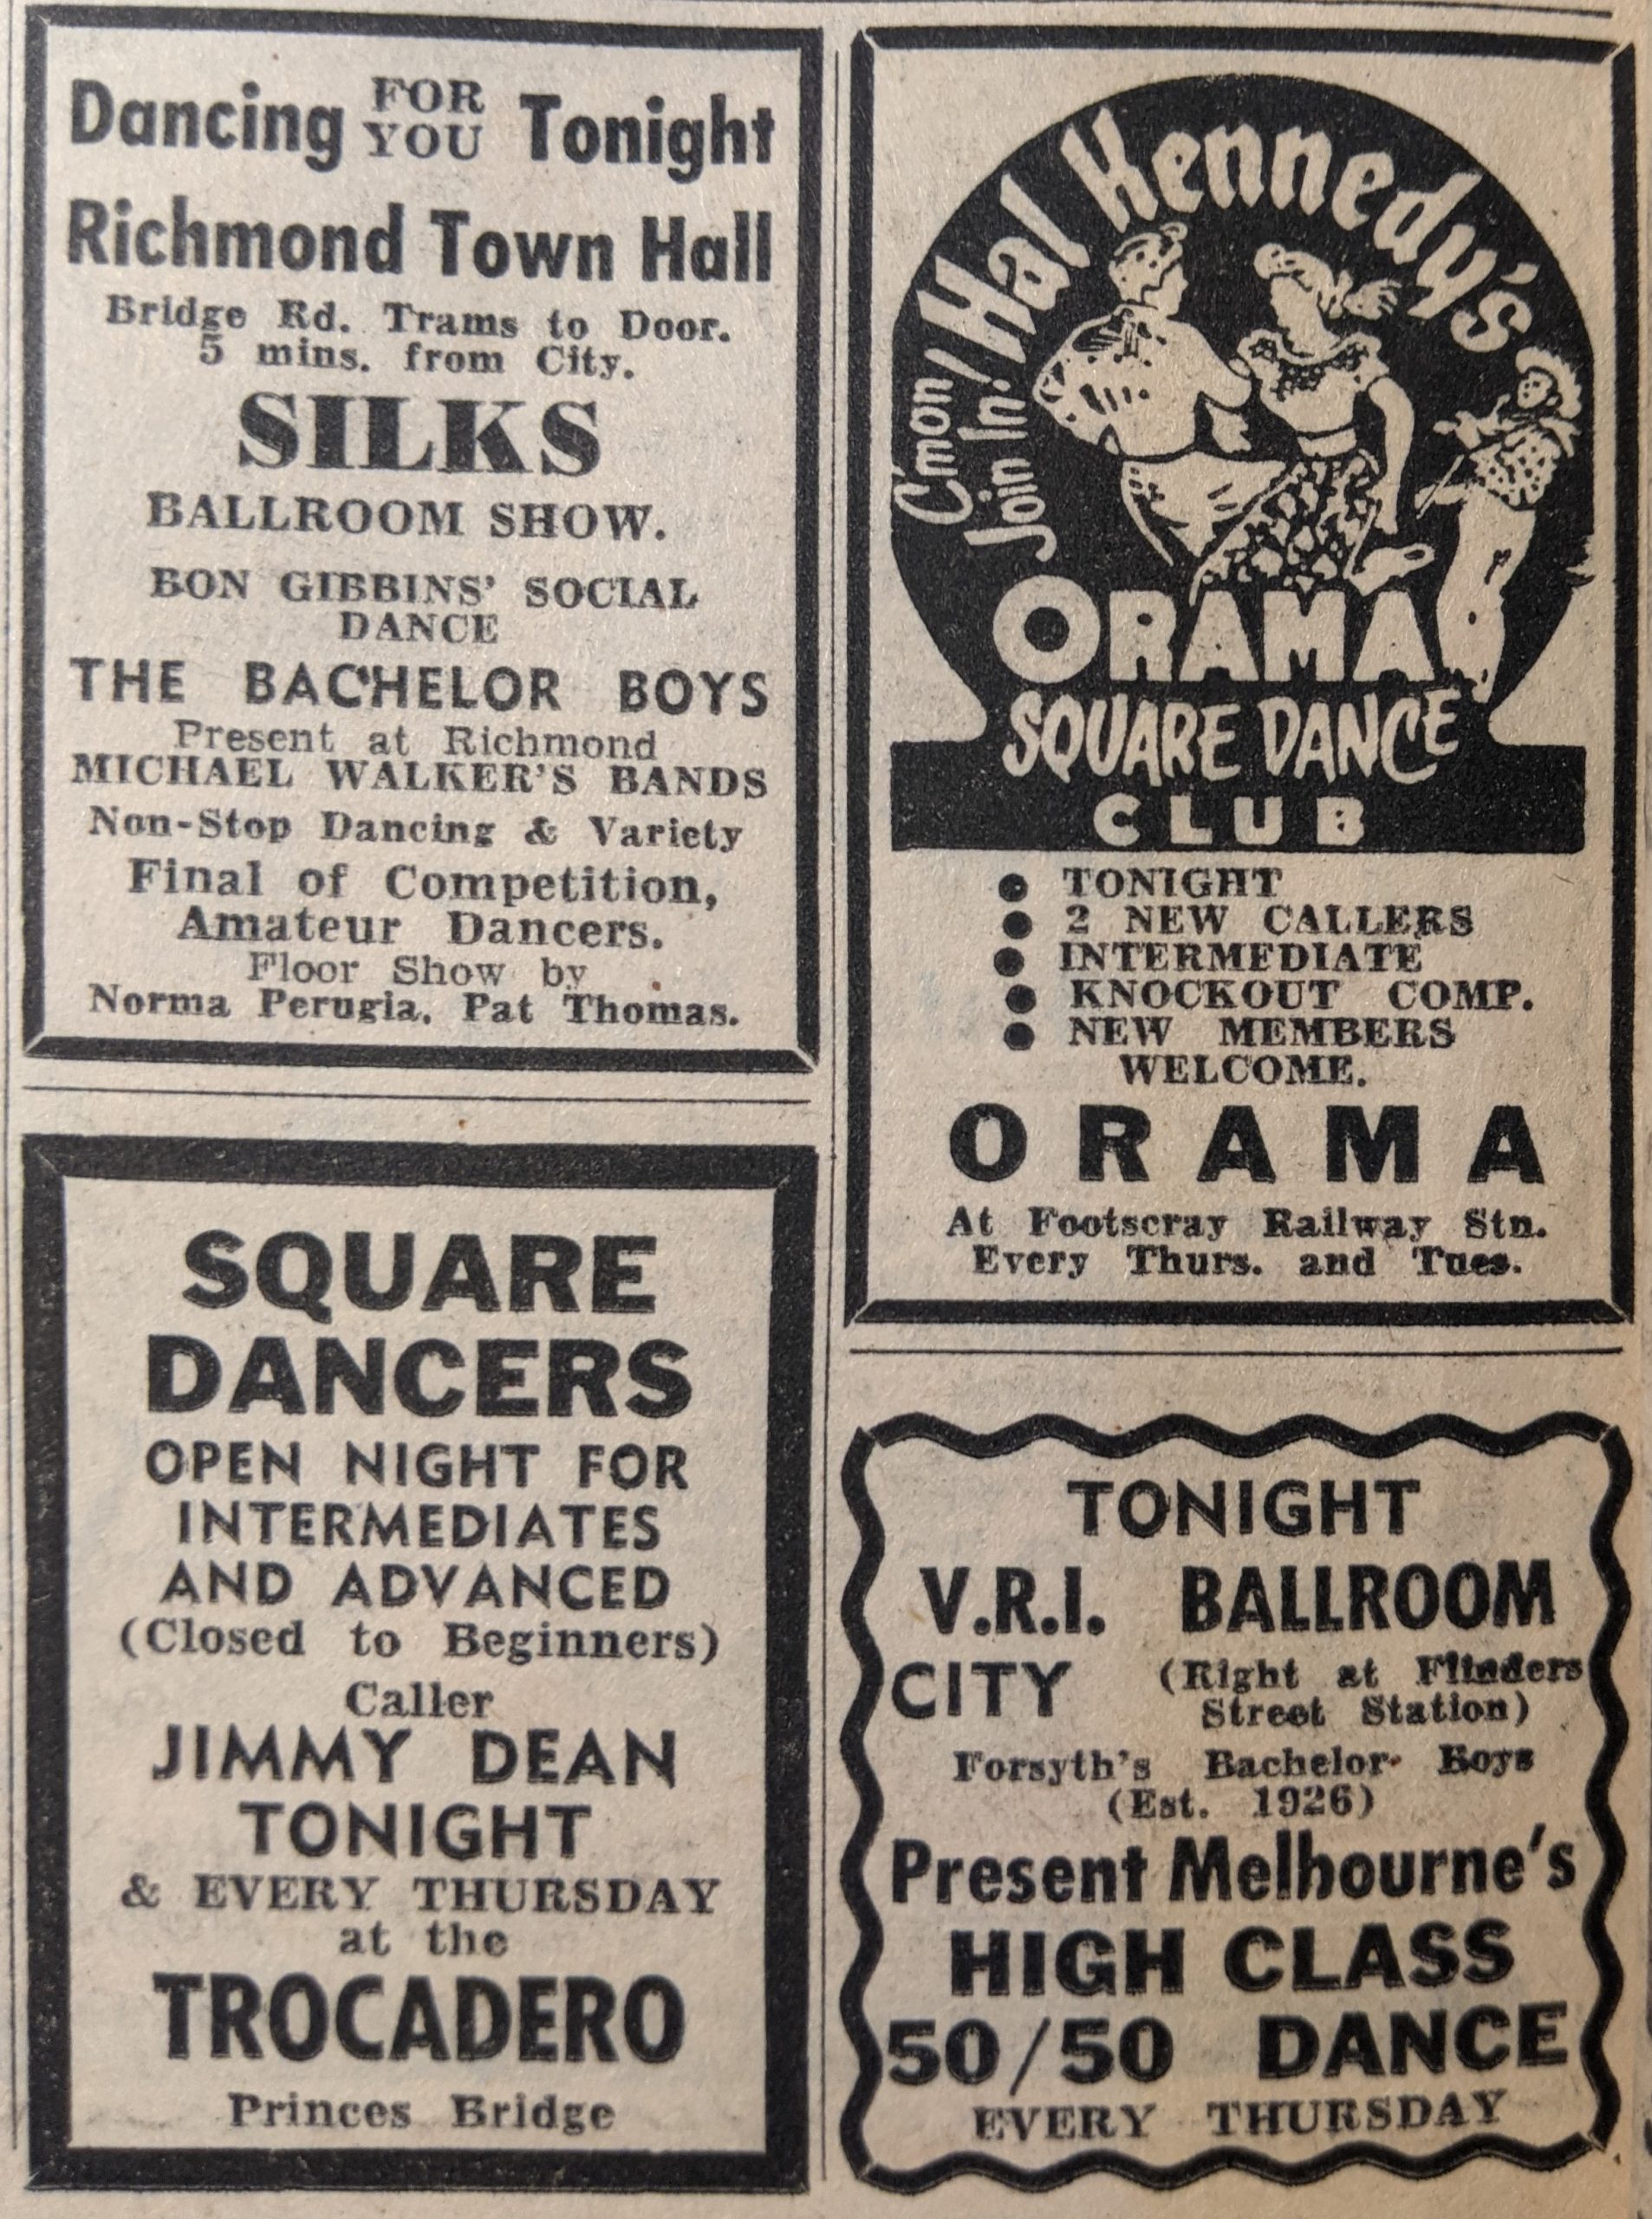 Dance advertisements, The Herald, 25 June 1953, p22. Via State Library of Victoria